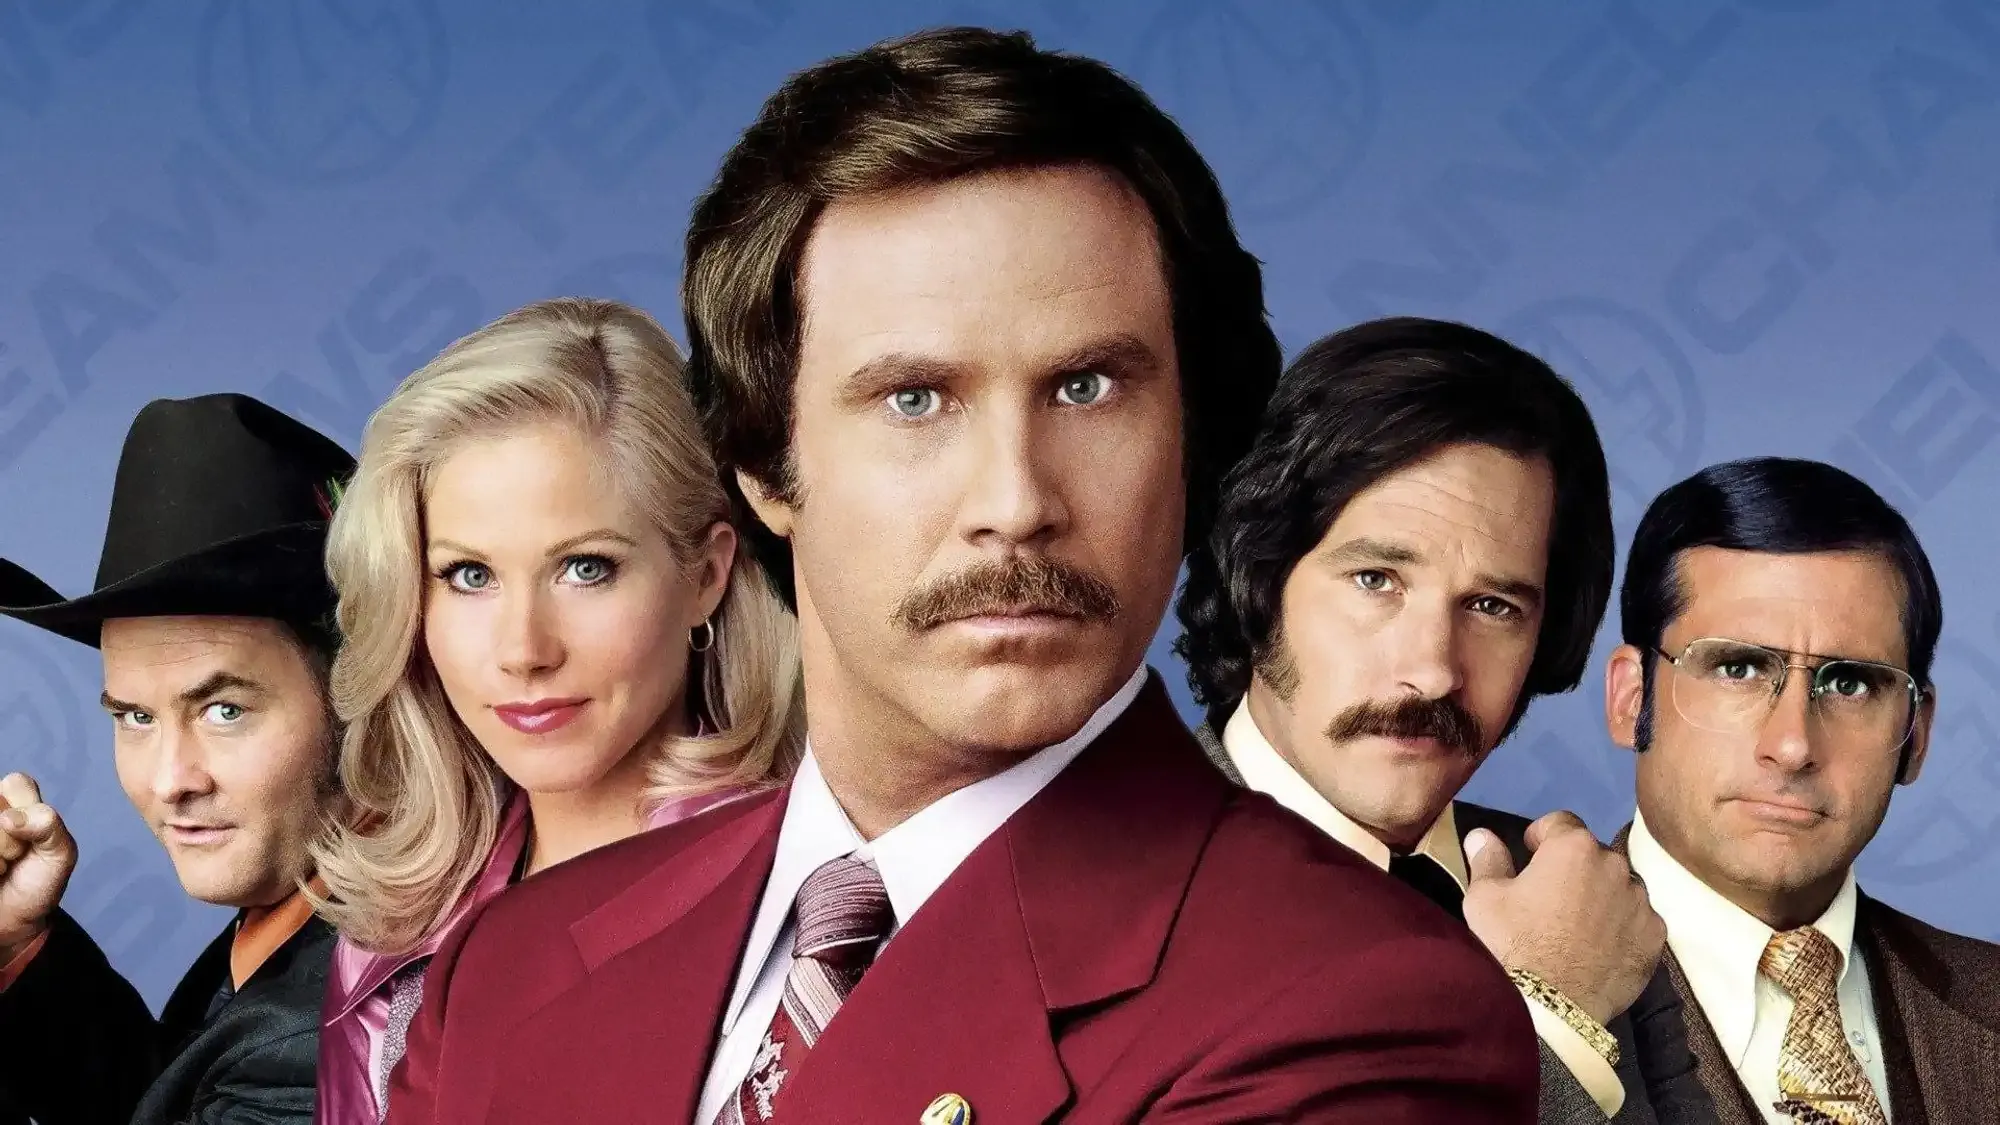 Anchorman: The Legend of Ron Burgundy movie review